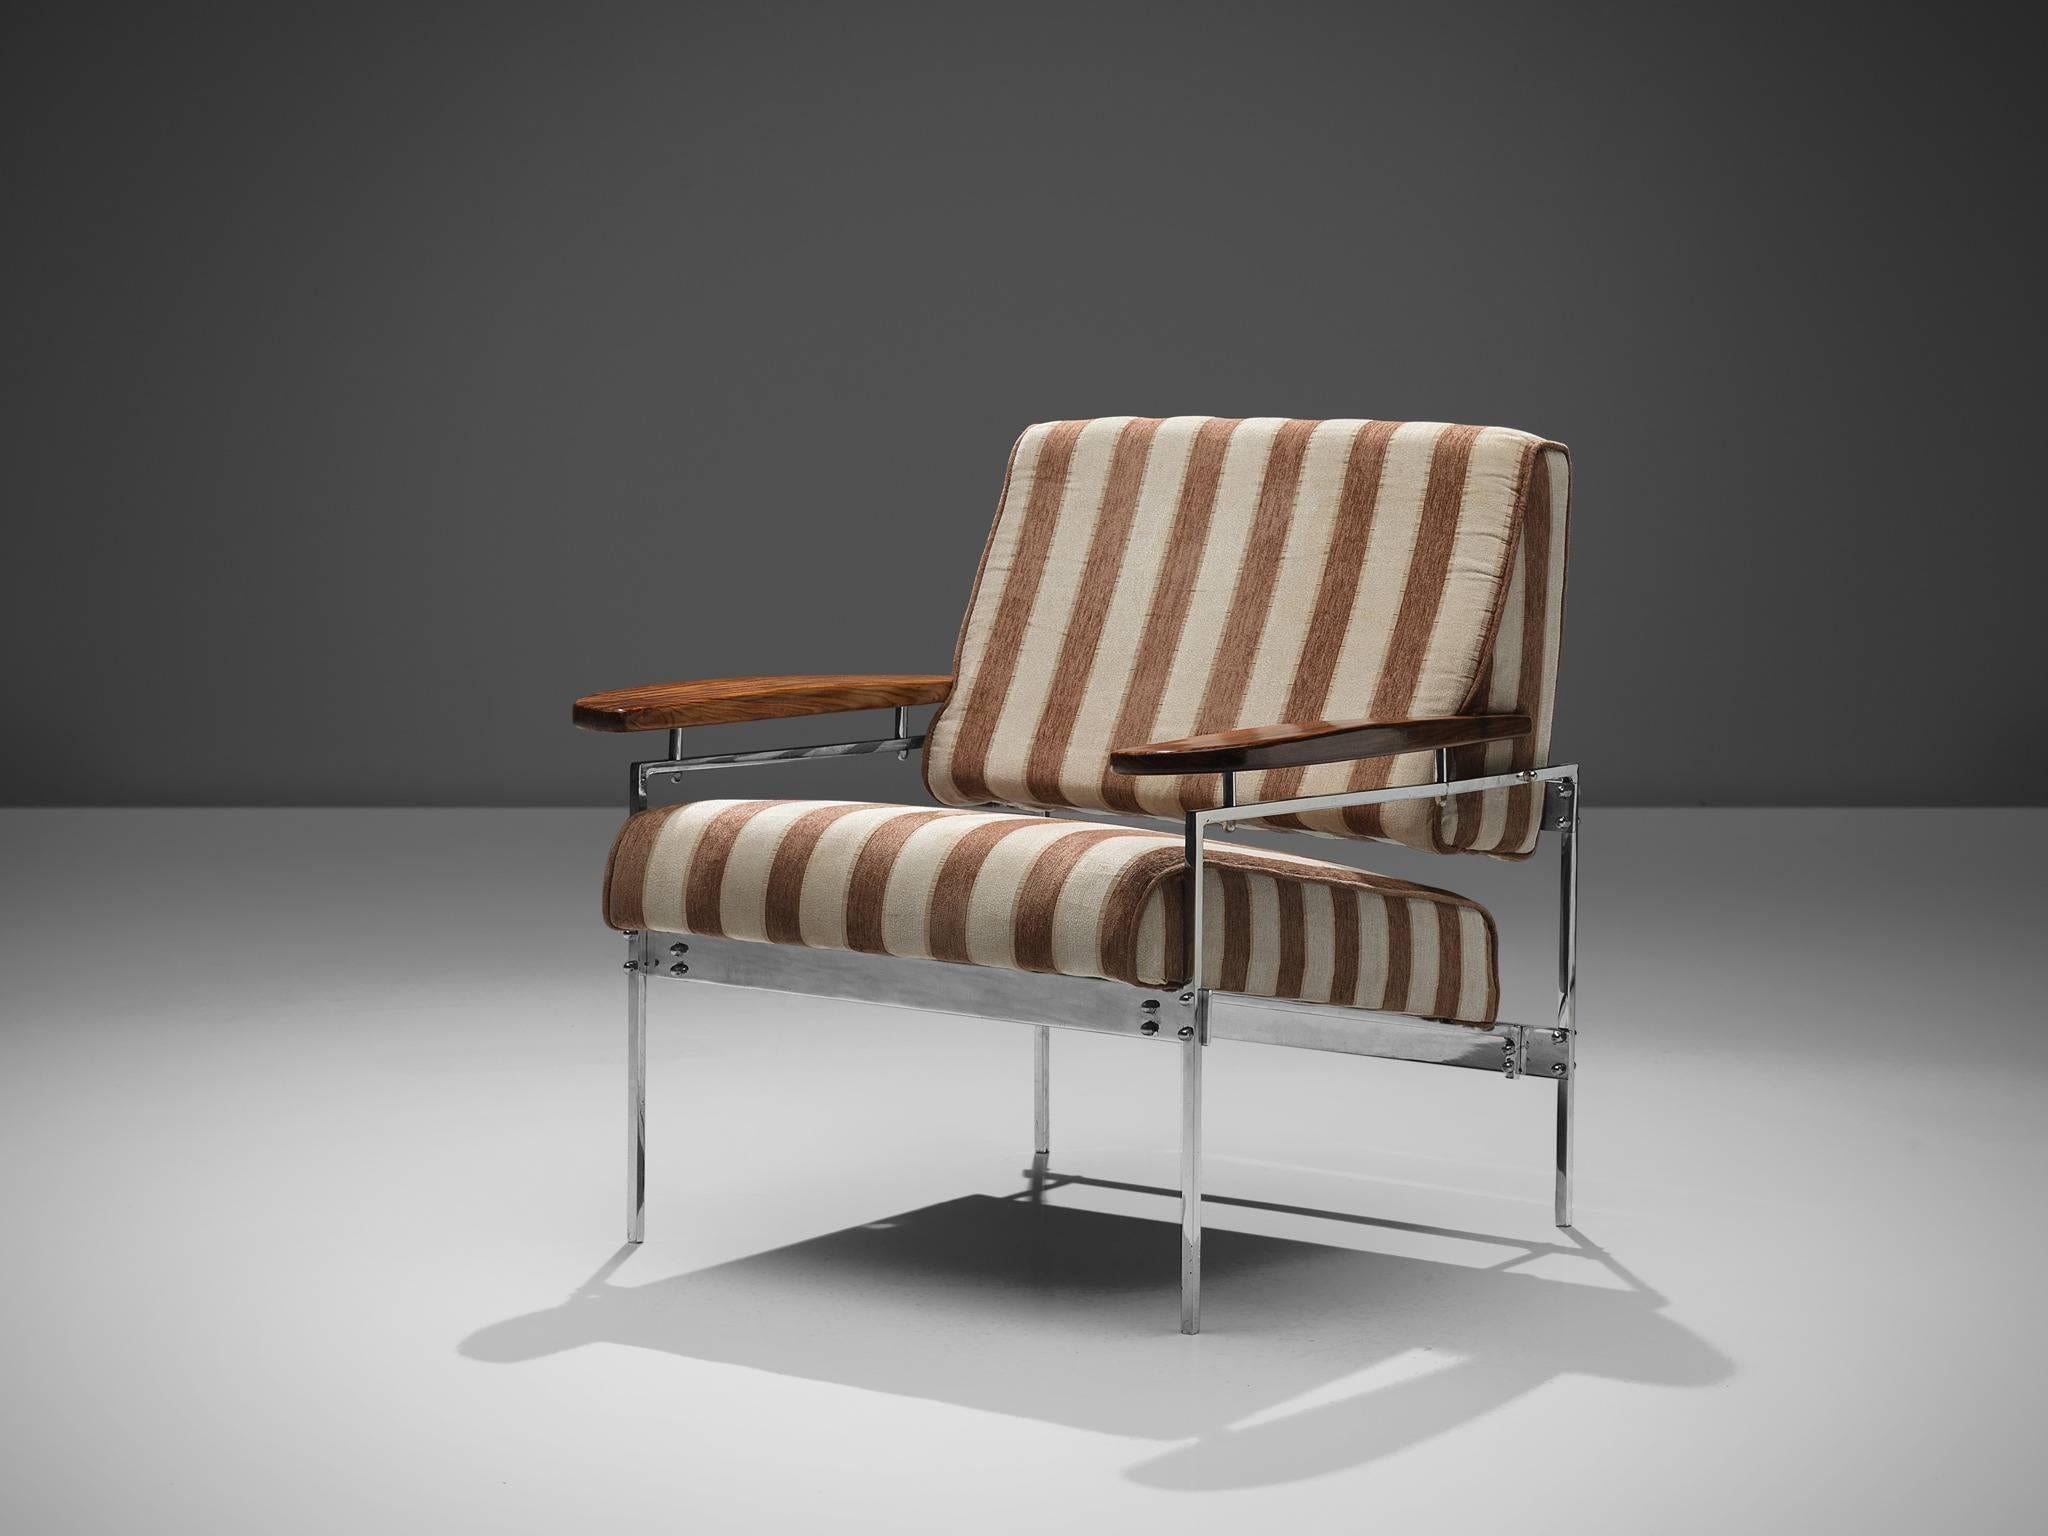 Sergio Rodrigues, 'Beto' armchair, chrome steel, wood, brown beige striped fabric, Brazil, 1958.

This 'Beto' armchair is designed by Sergio Rodrigues. The chair features a chrome steel frame, a brown beige striped fabric and wooden armrests. The